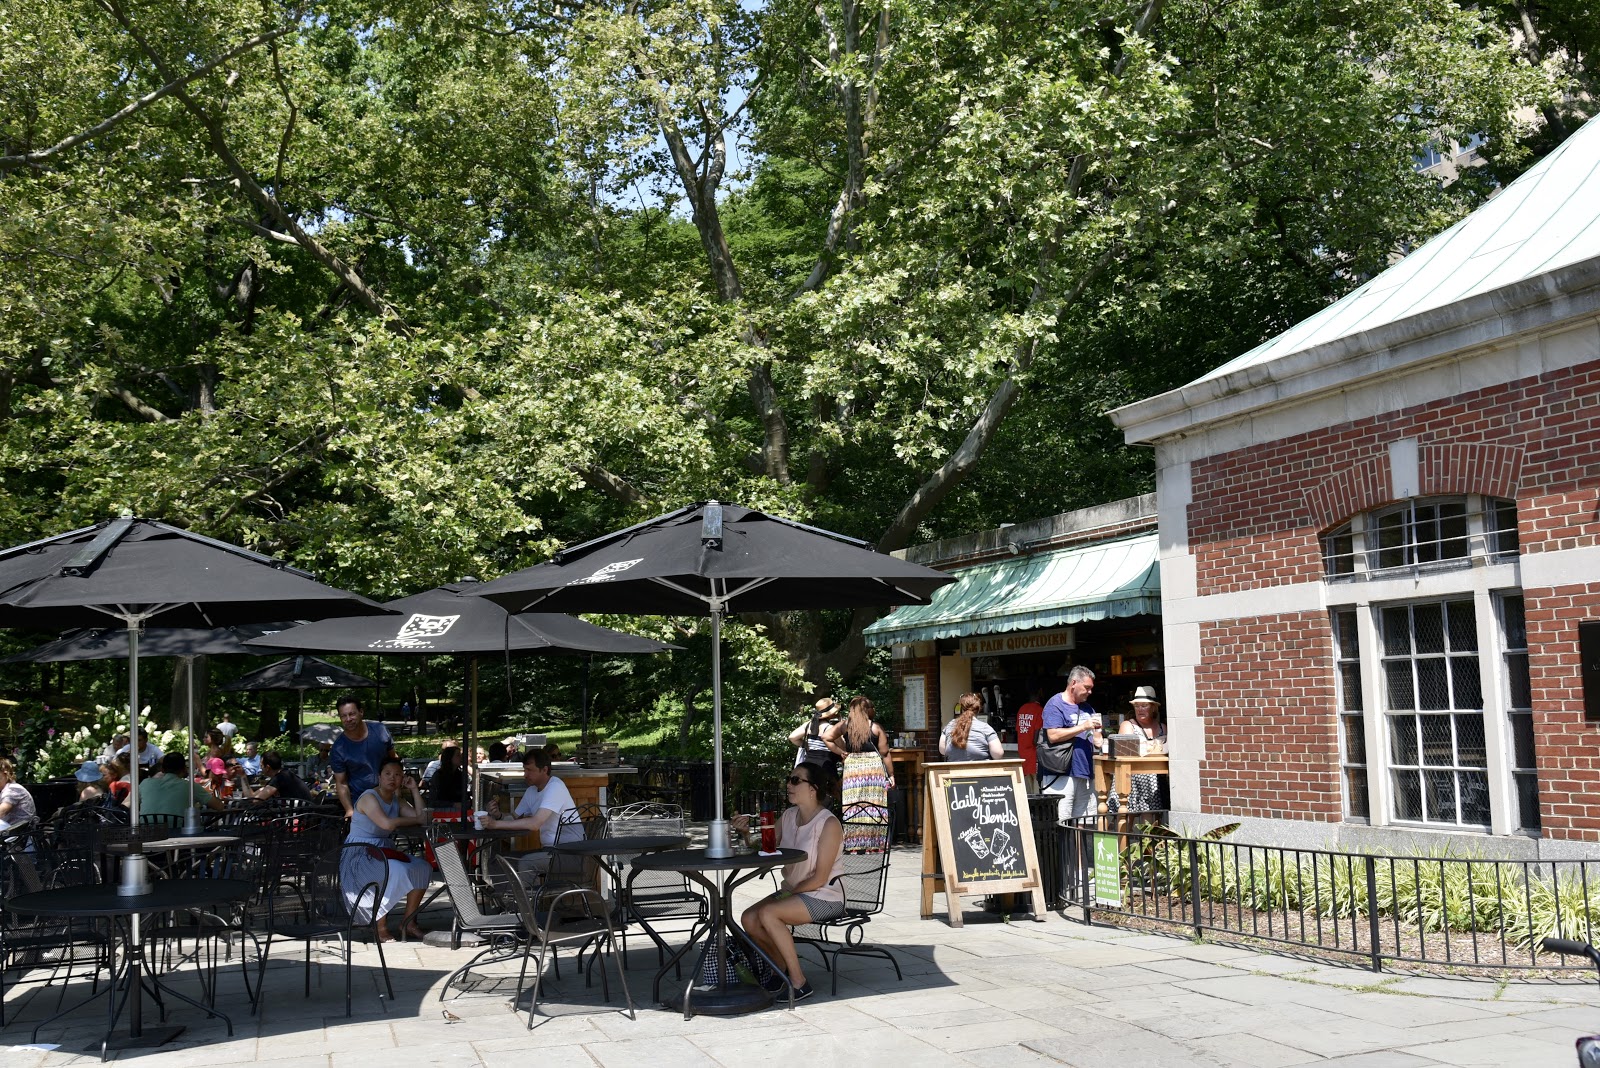 where to eat breakfast near central park